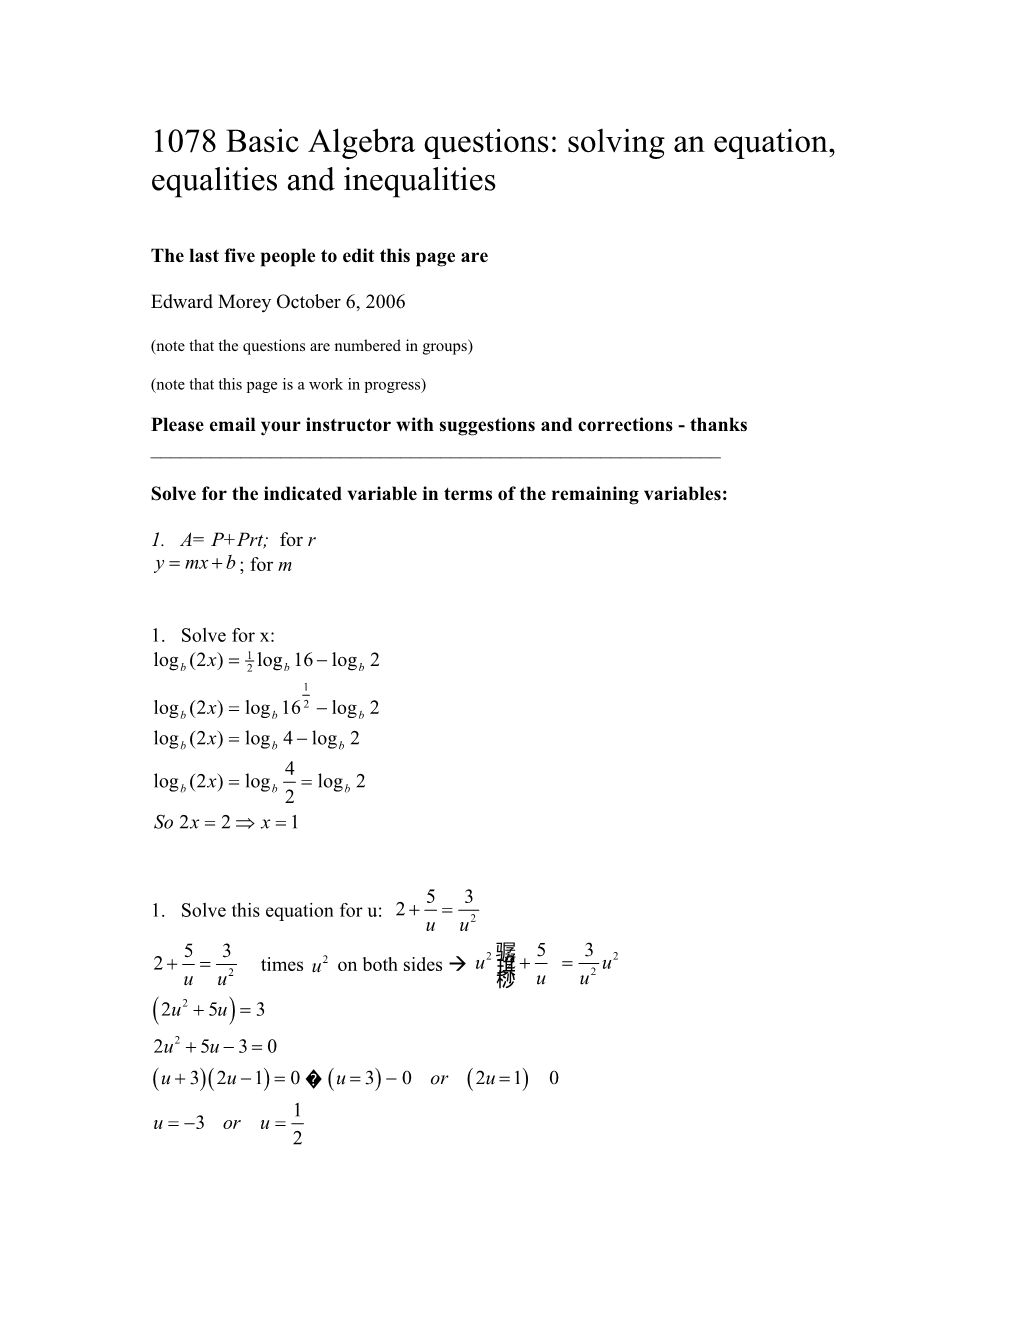 1078 Basic Algebra Questions: Solving an Equation and Equalities